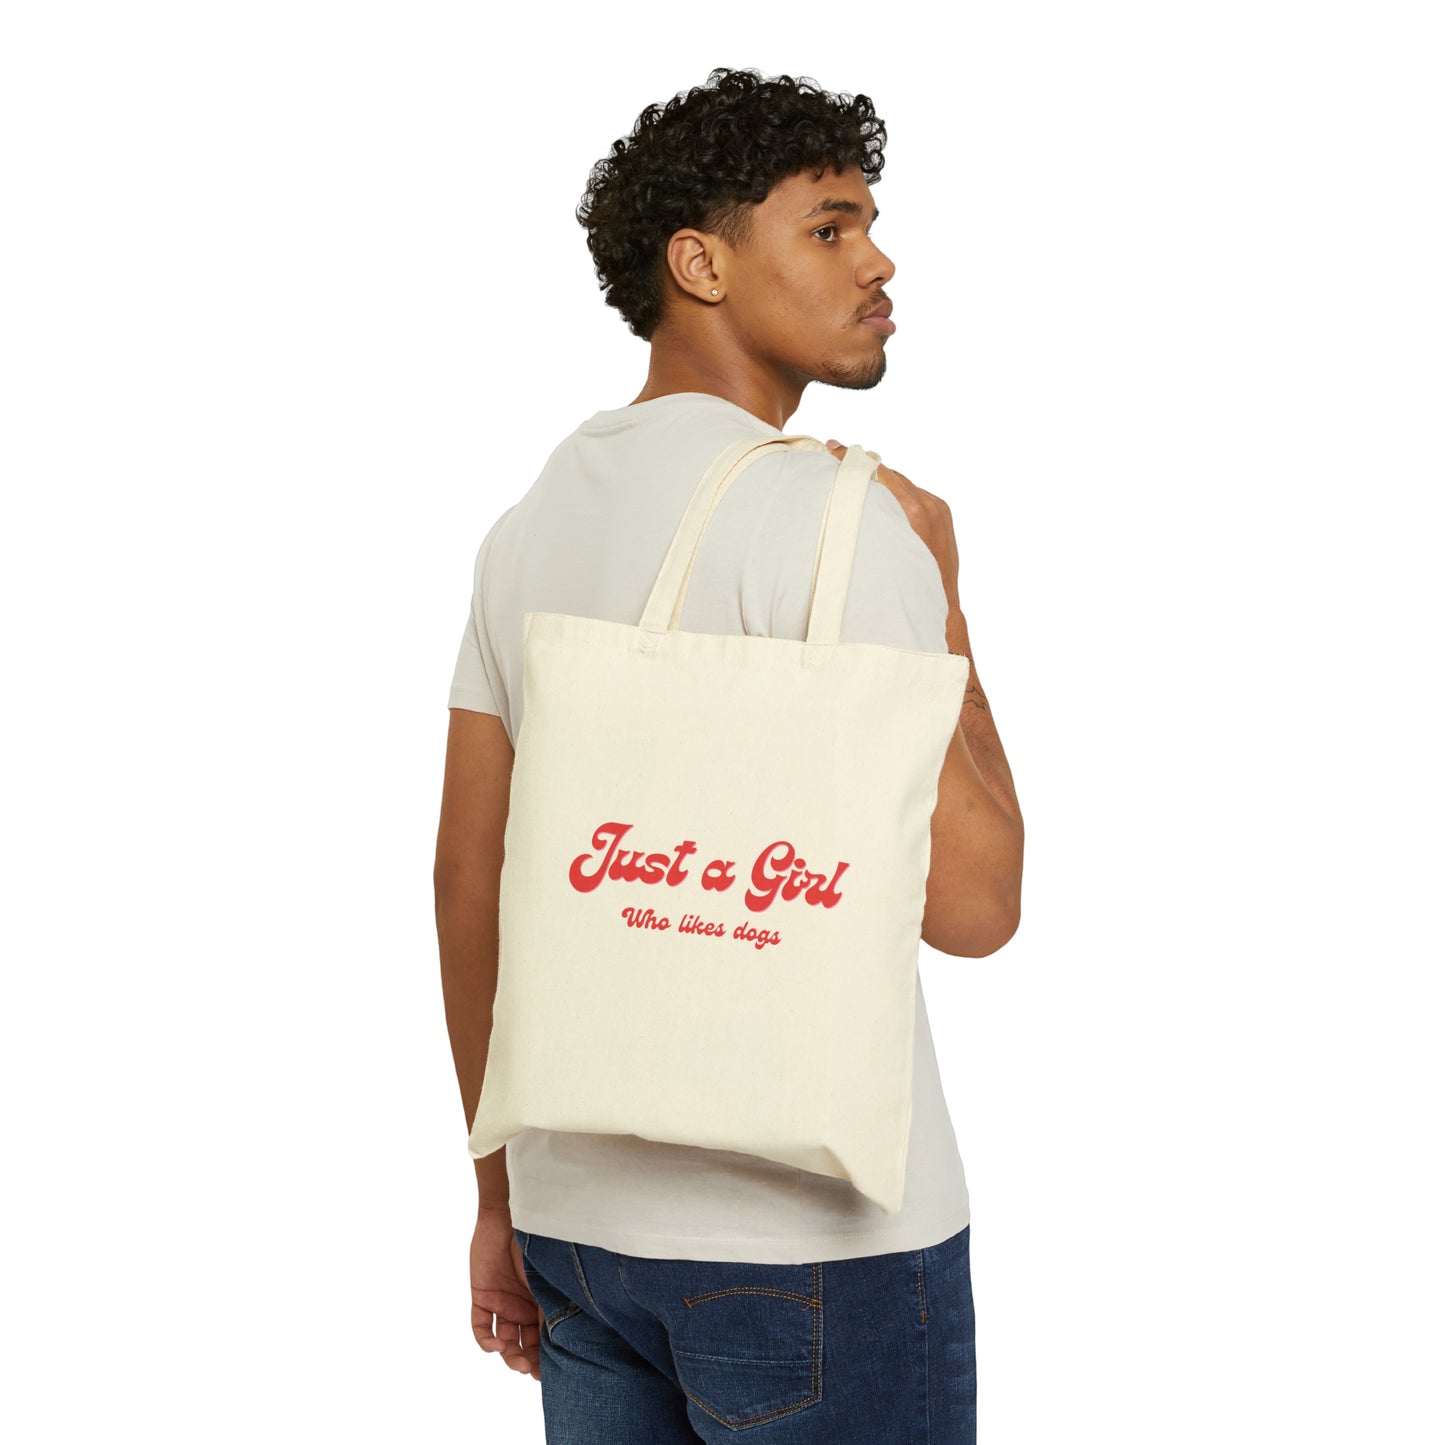 Just a Girl Tote Bag